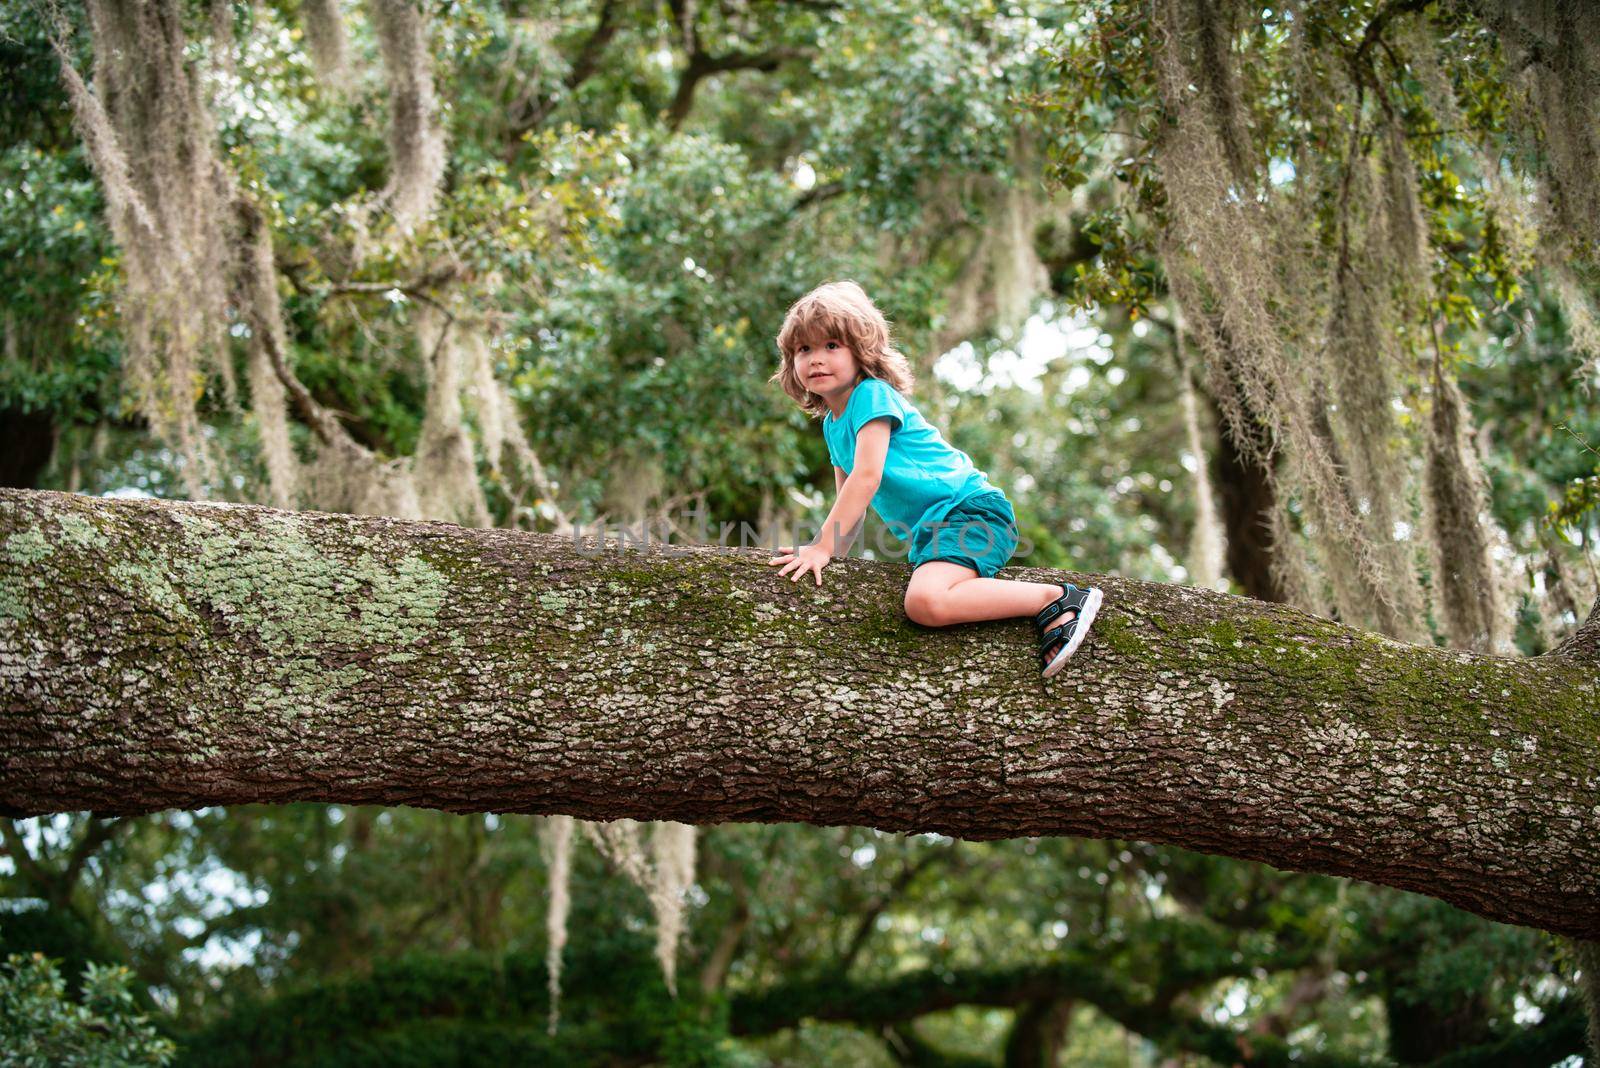 Cute boy Child in a tree on a big branch. Summer hike with kids. Childhood leisure and people concept